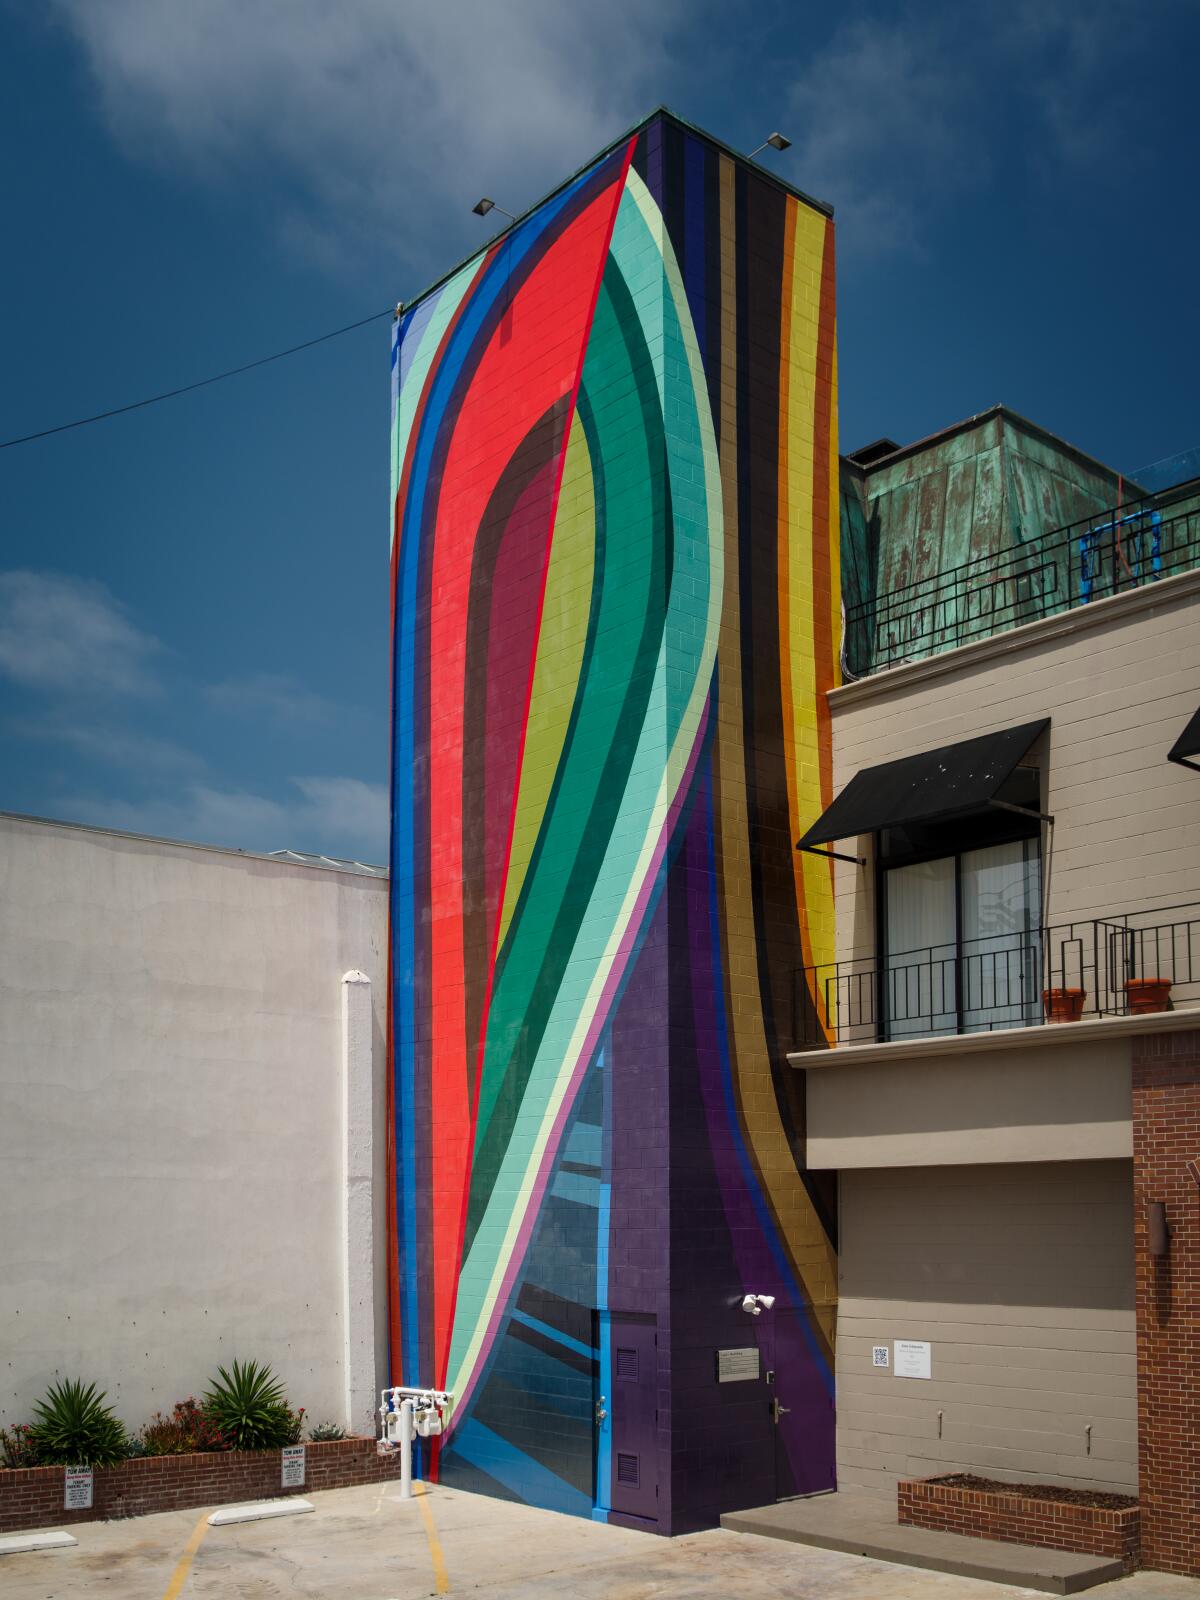 June Edmonds' mural “Ebony on Draper and Girard” is on the alley-facing side of 7724 Girard Ave. in La Jolla.